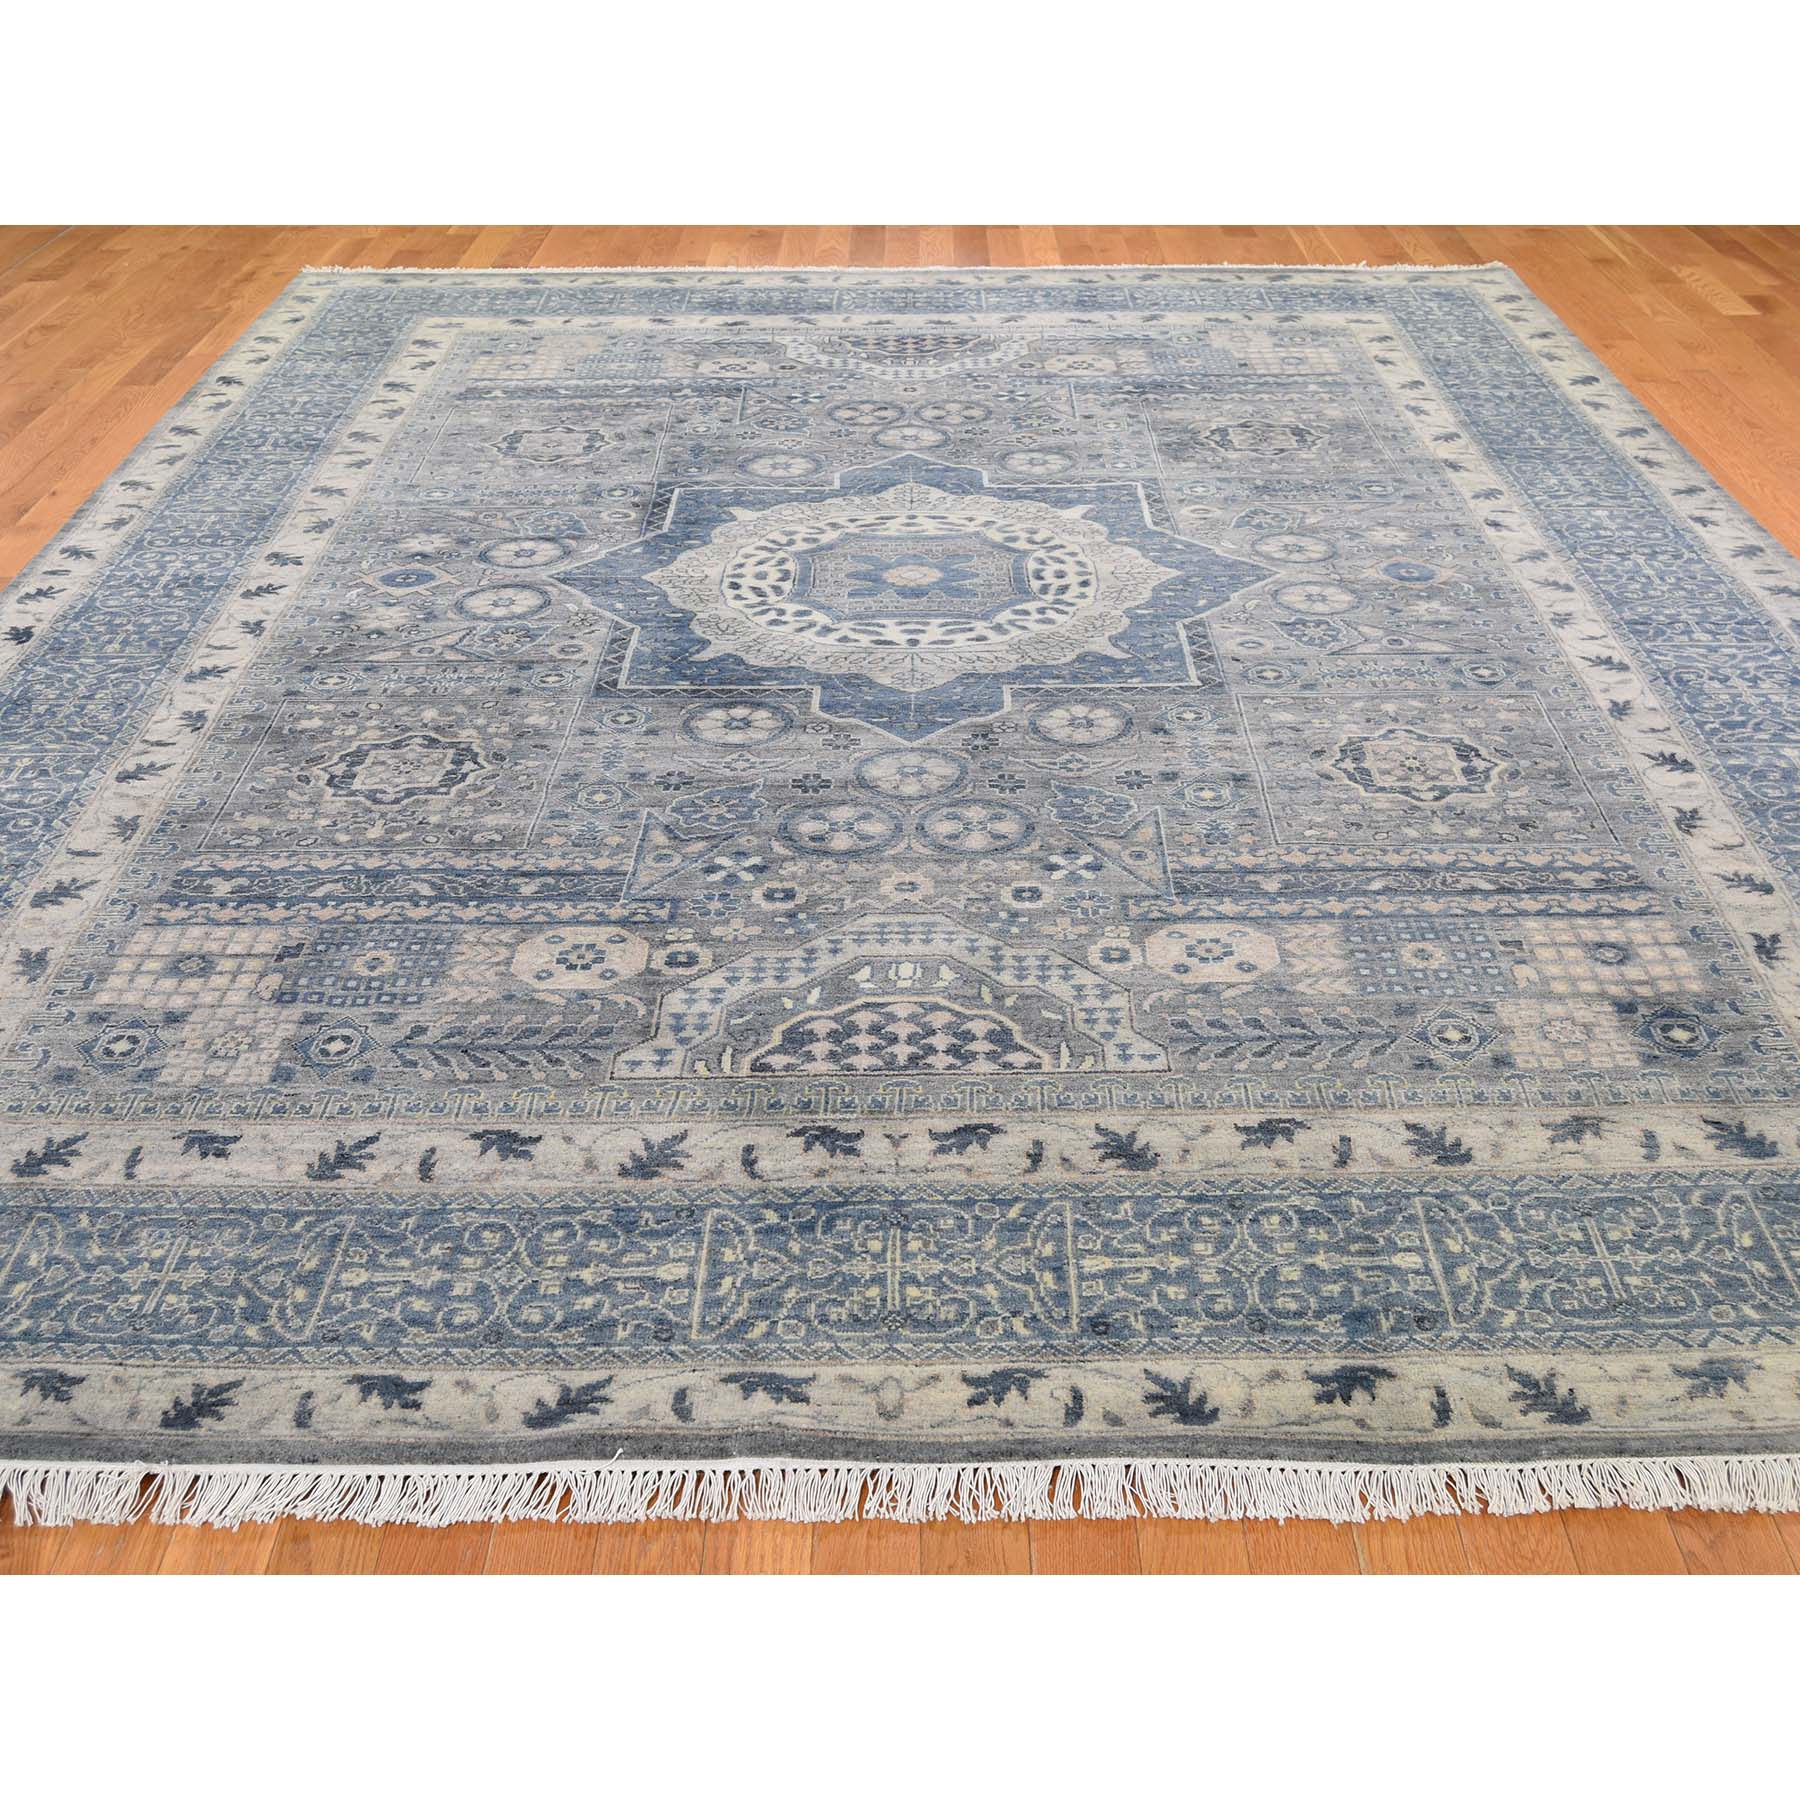 9-2 x12-2  Blue Pure Wool Mamluk Design Hand-Knotted Oriental Rug 